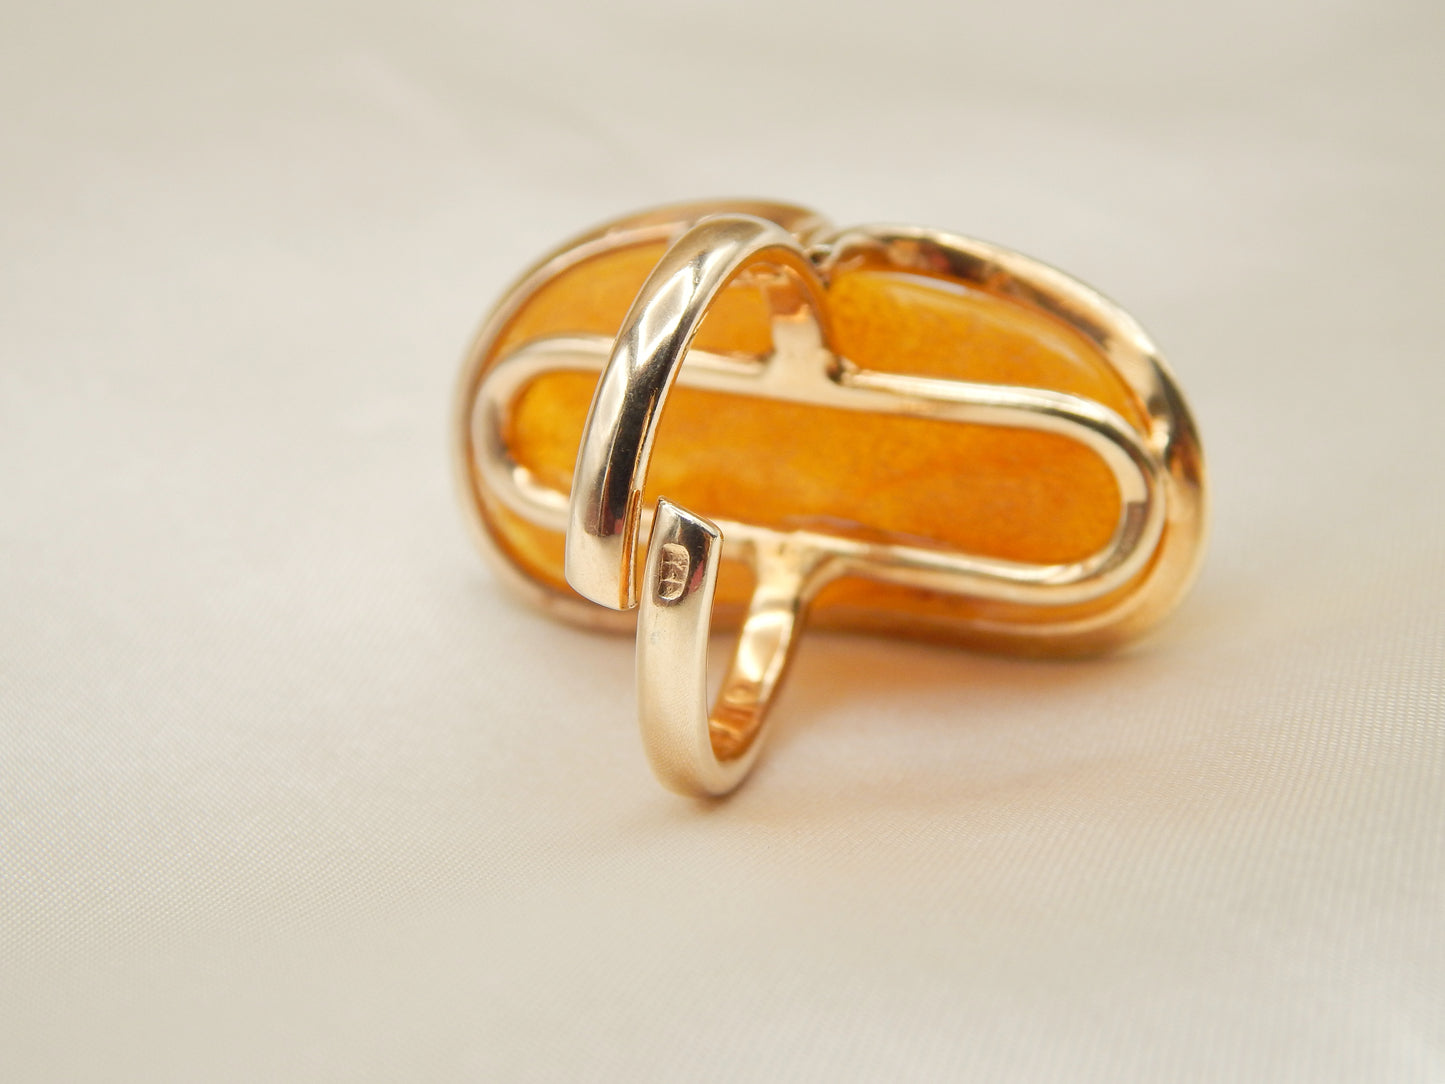 Natural Baltic Butterscotch Amber Adjustable Statement Ring in 14k Gold Plated s925